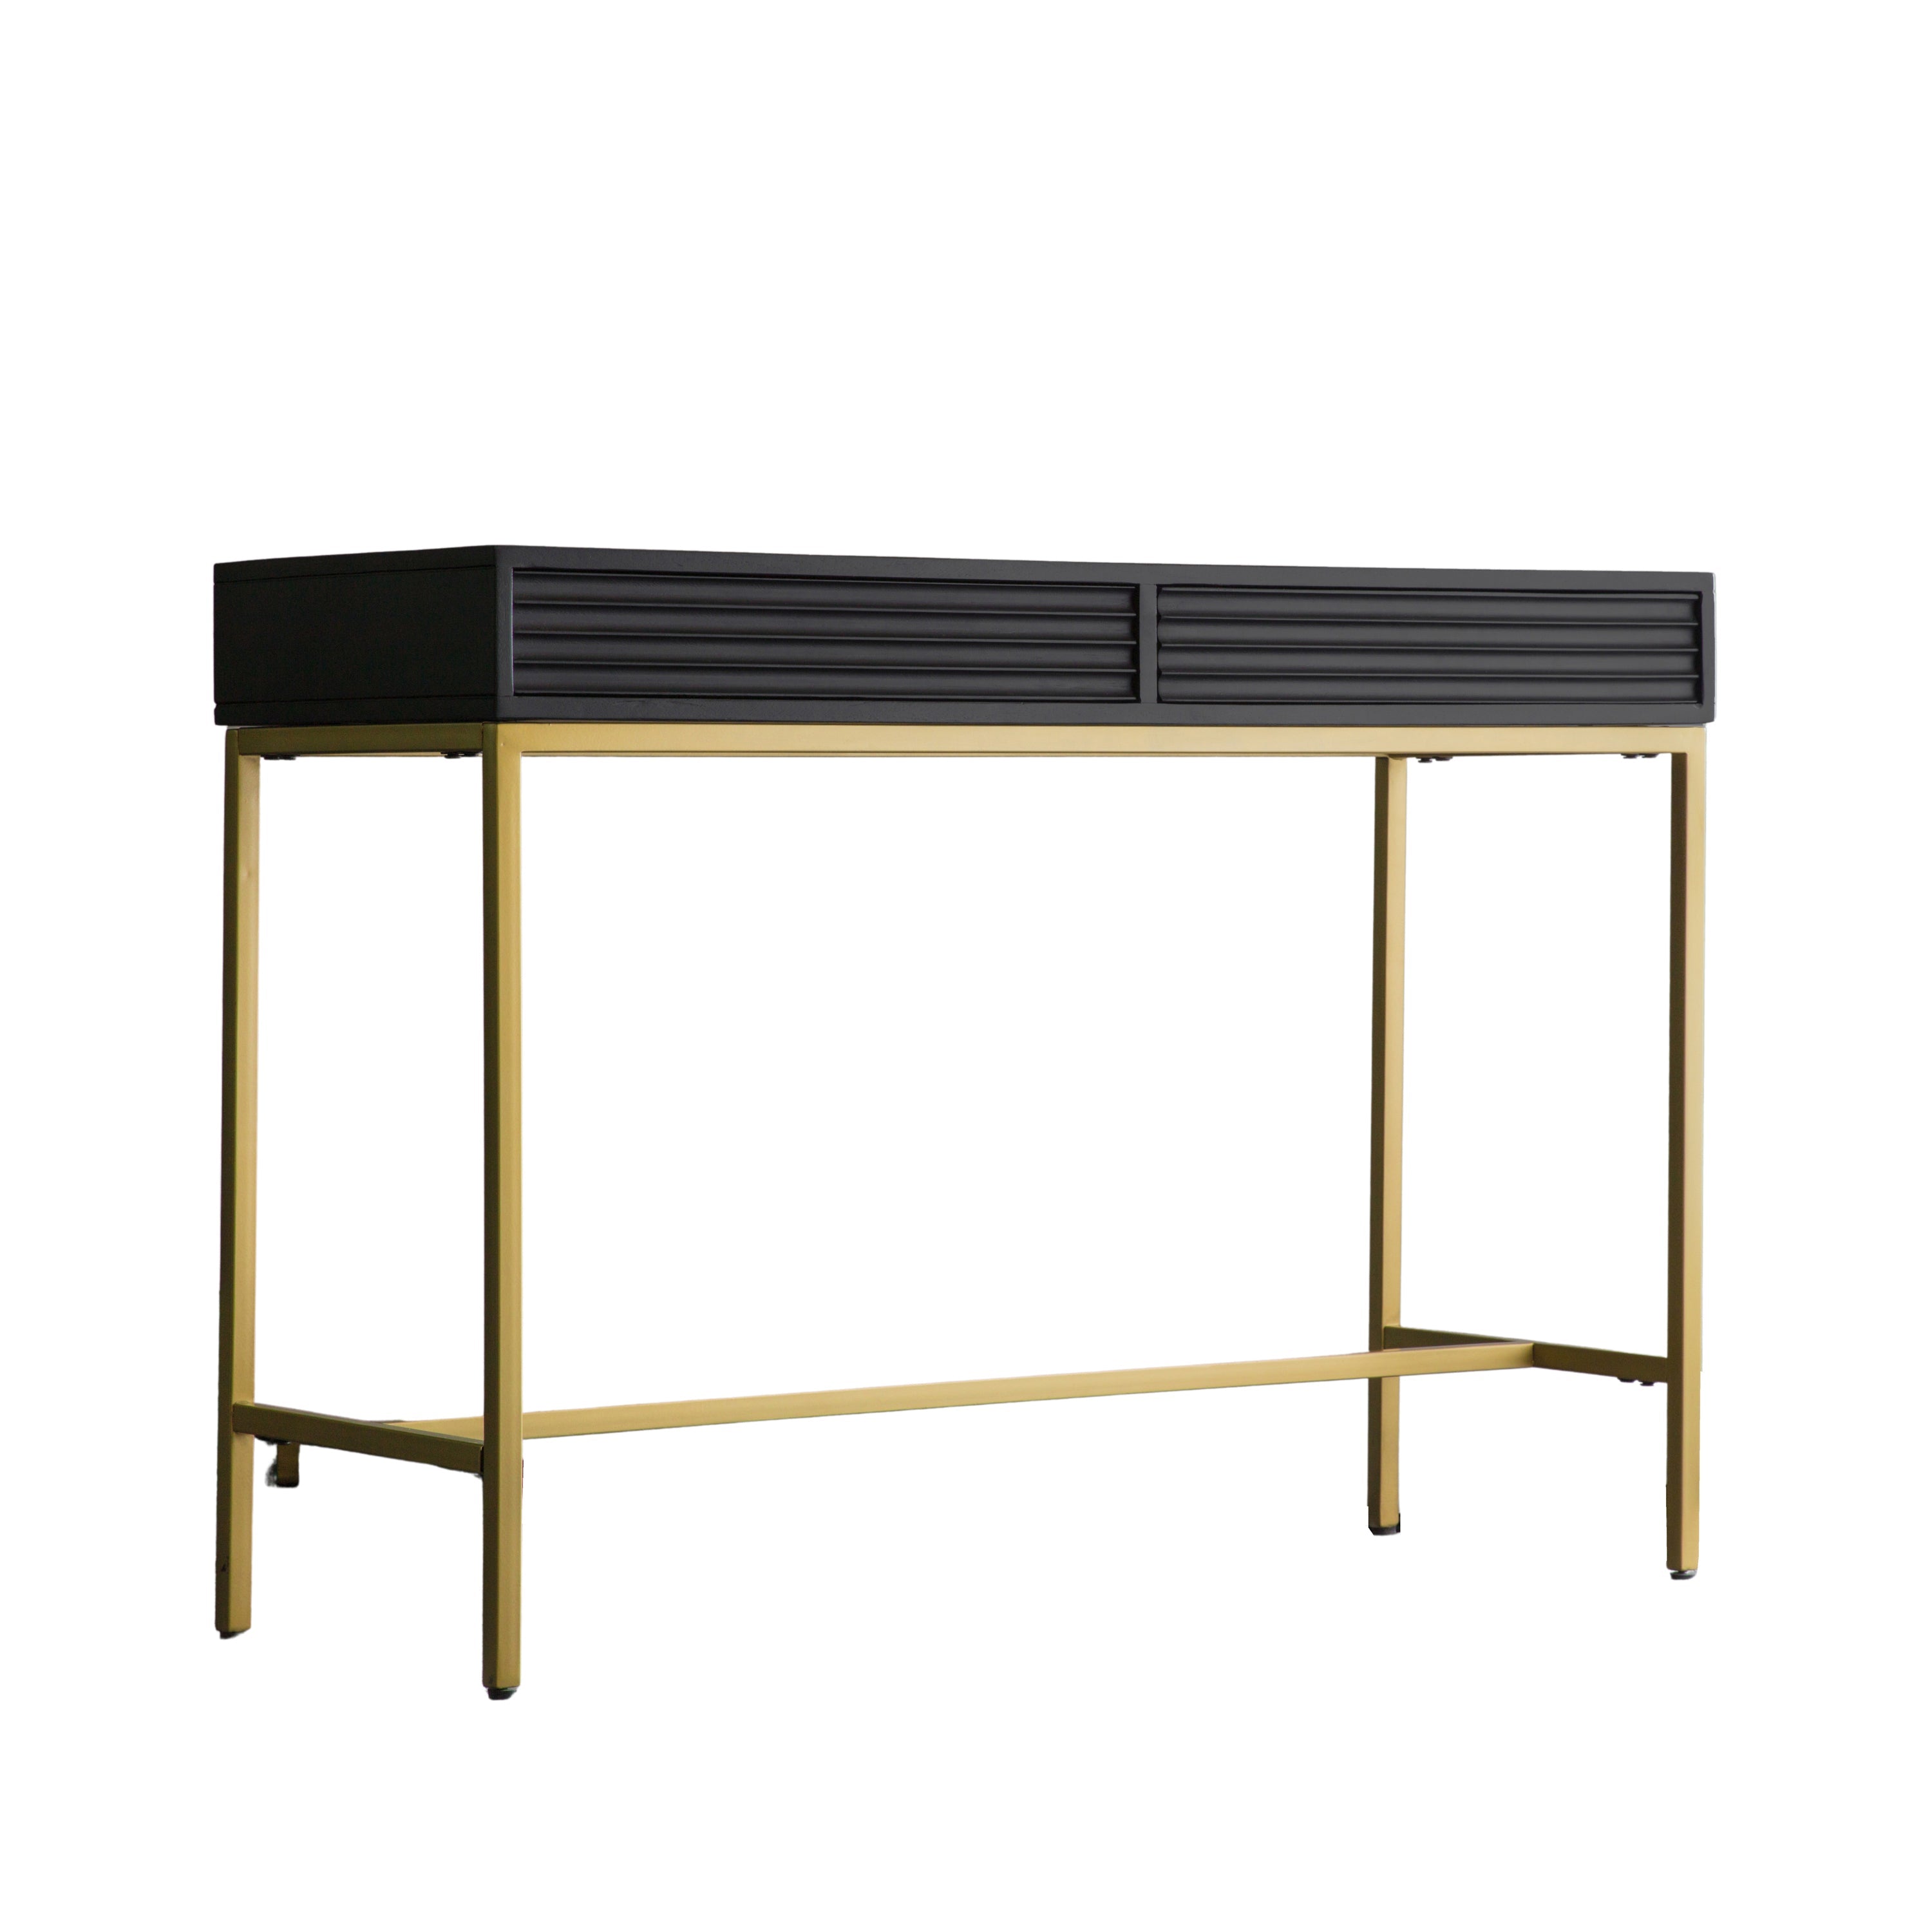 Ripple 2 Drawer Console Table 1100x400x780mm